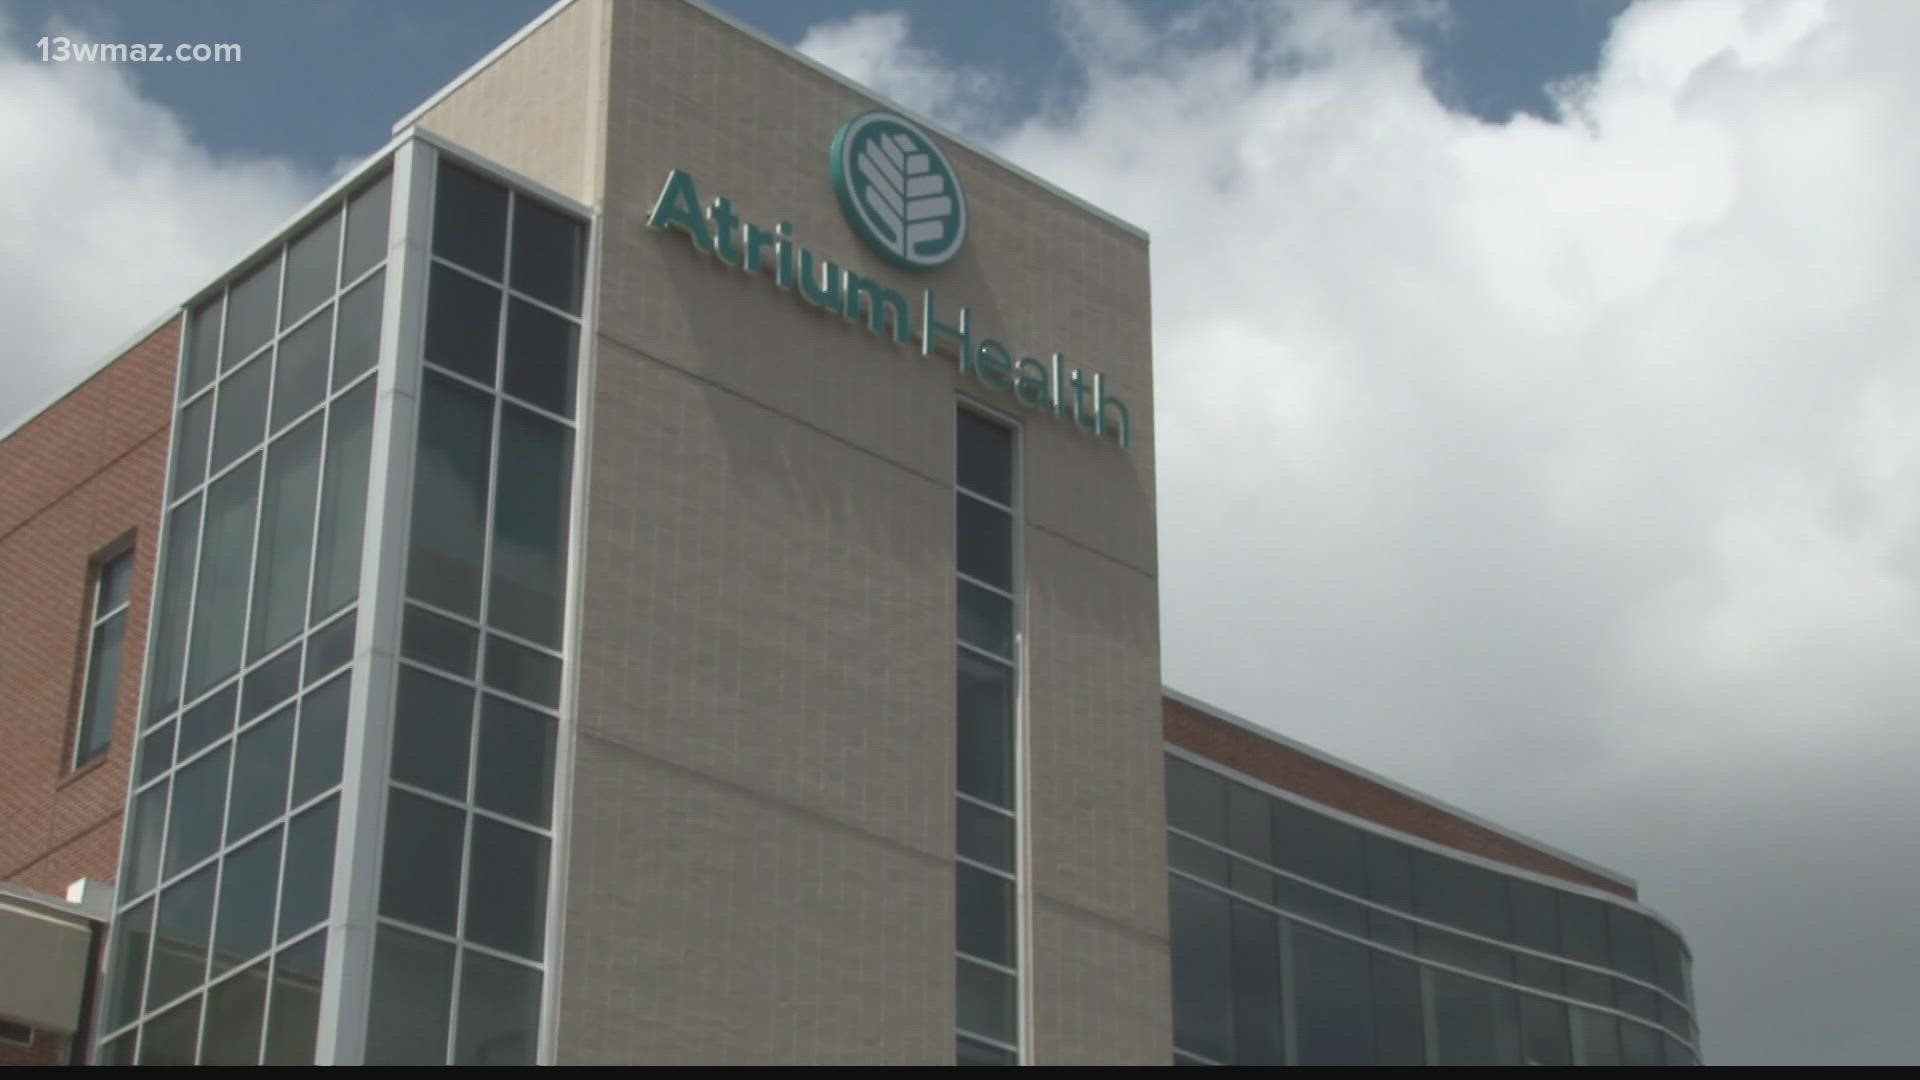 According to a news release, N.C.-based Atrium Health plans to merge with Advocate Aurora Health.